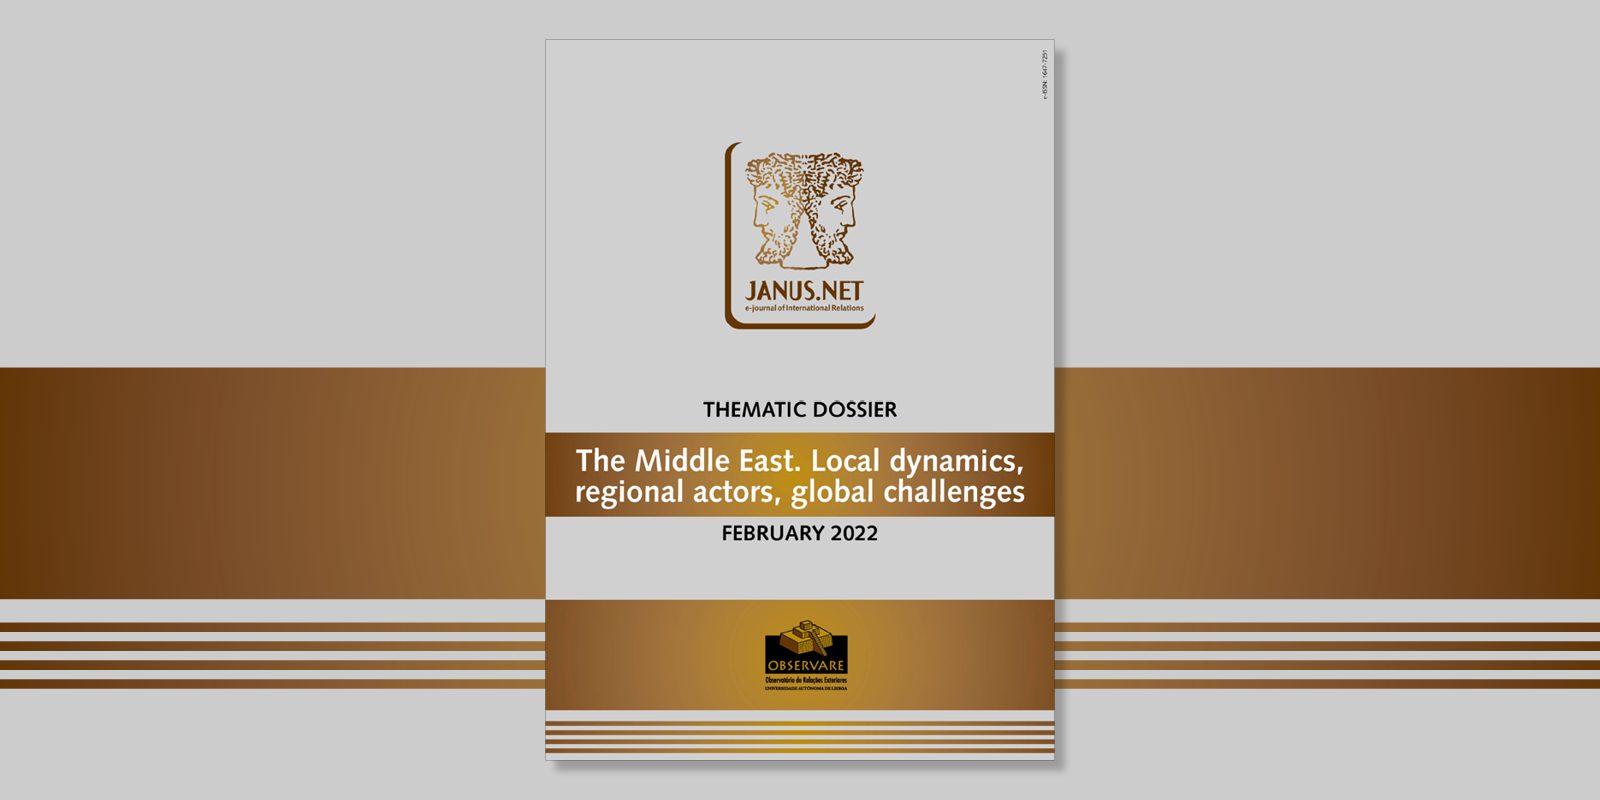 JANUS.NET – THEMATIC DOSSIER – The Middle East. Local dynamics, regional actors, global challenges